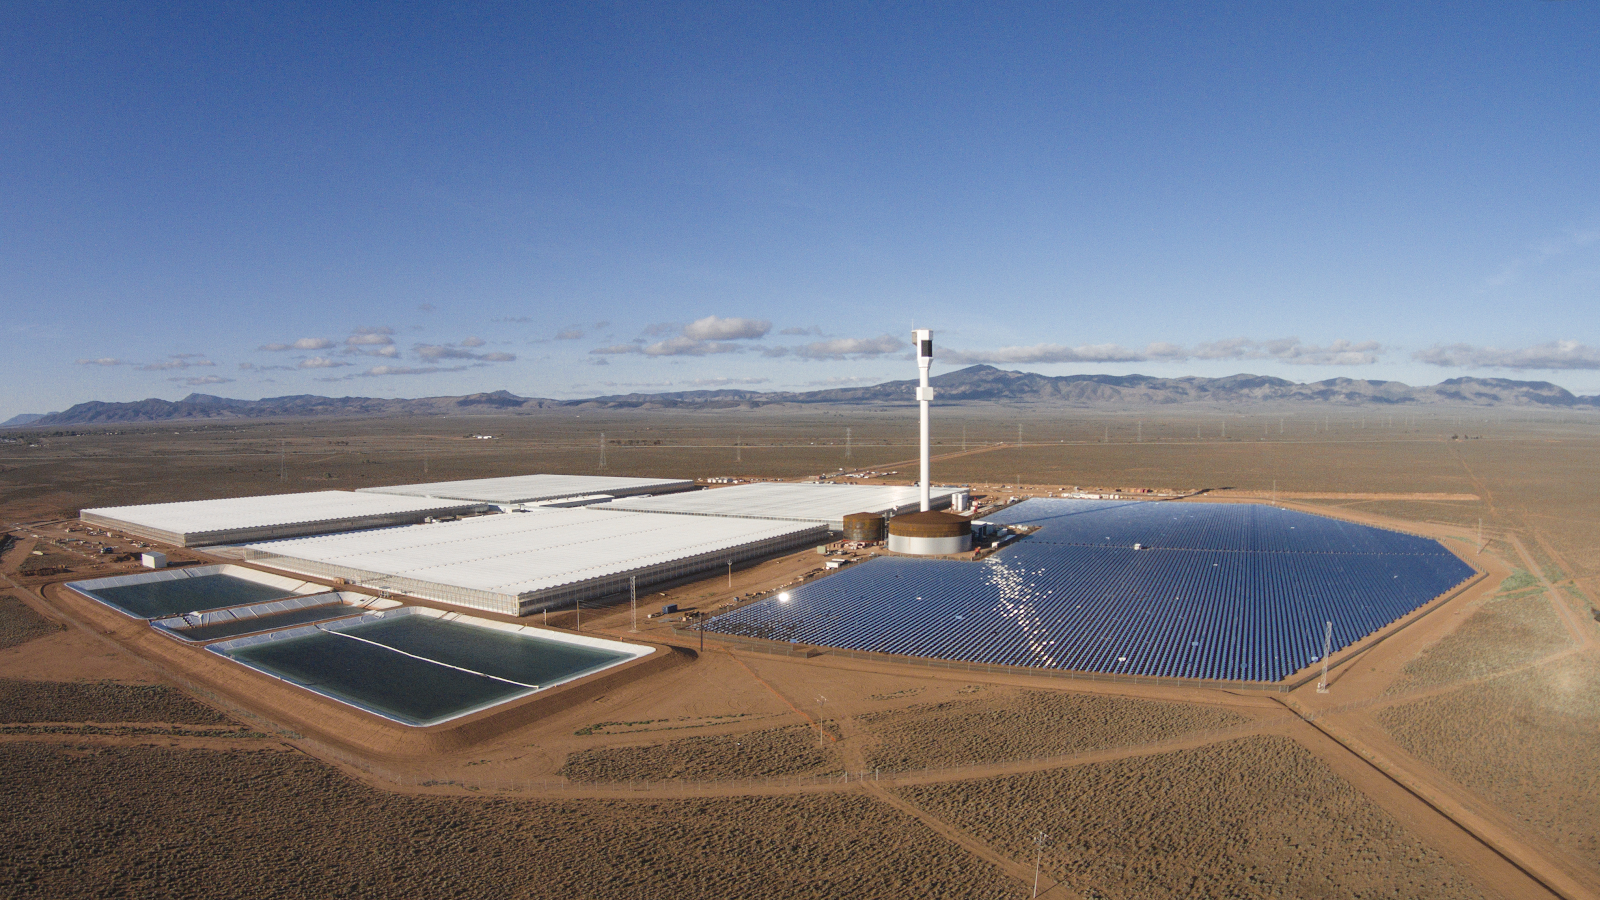 Sundrop Farms’ greenhouse facility in South Australia. Solar energy generated on site is used to power the facility, and a thermal desalination plant converts seawater from the nearby Spencer Gulf into freshwater for crops. The facility is expected …